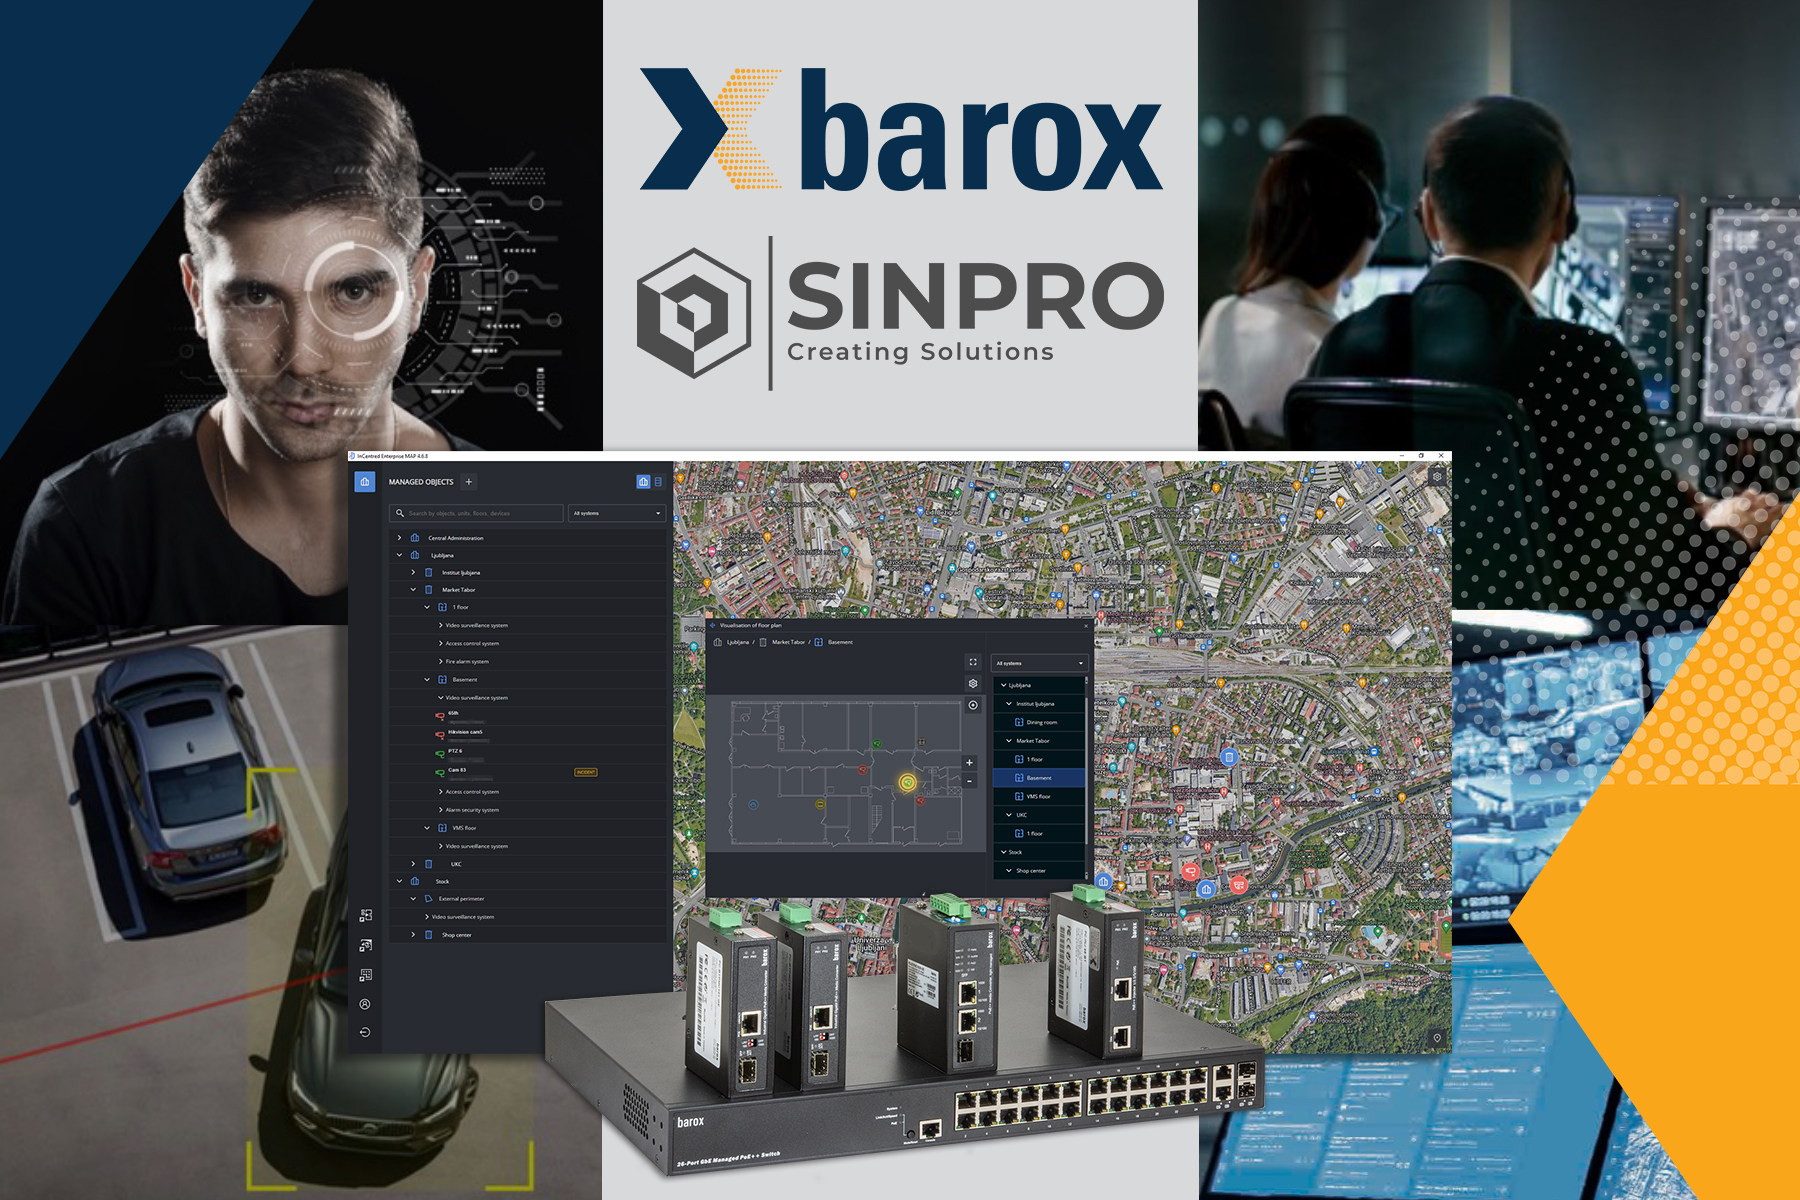 New partnership with leading Balkans security solutions provider SINPRO